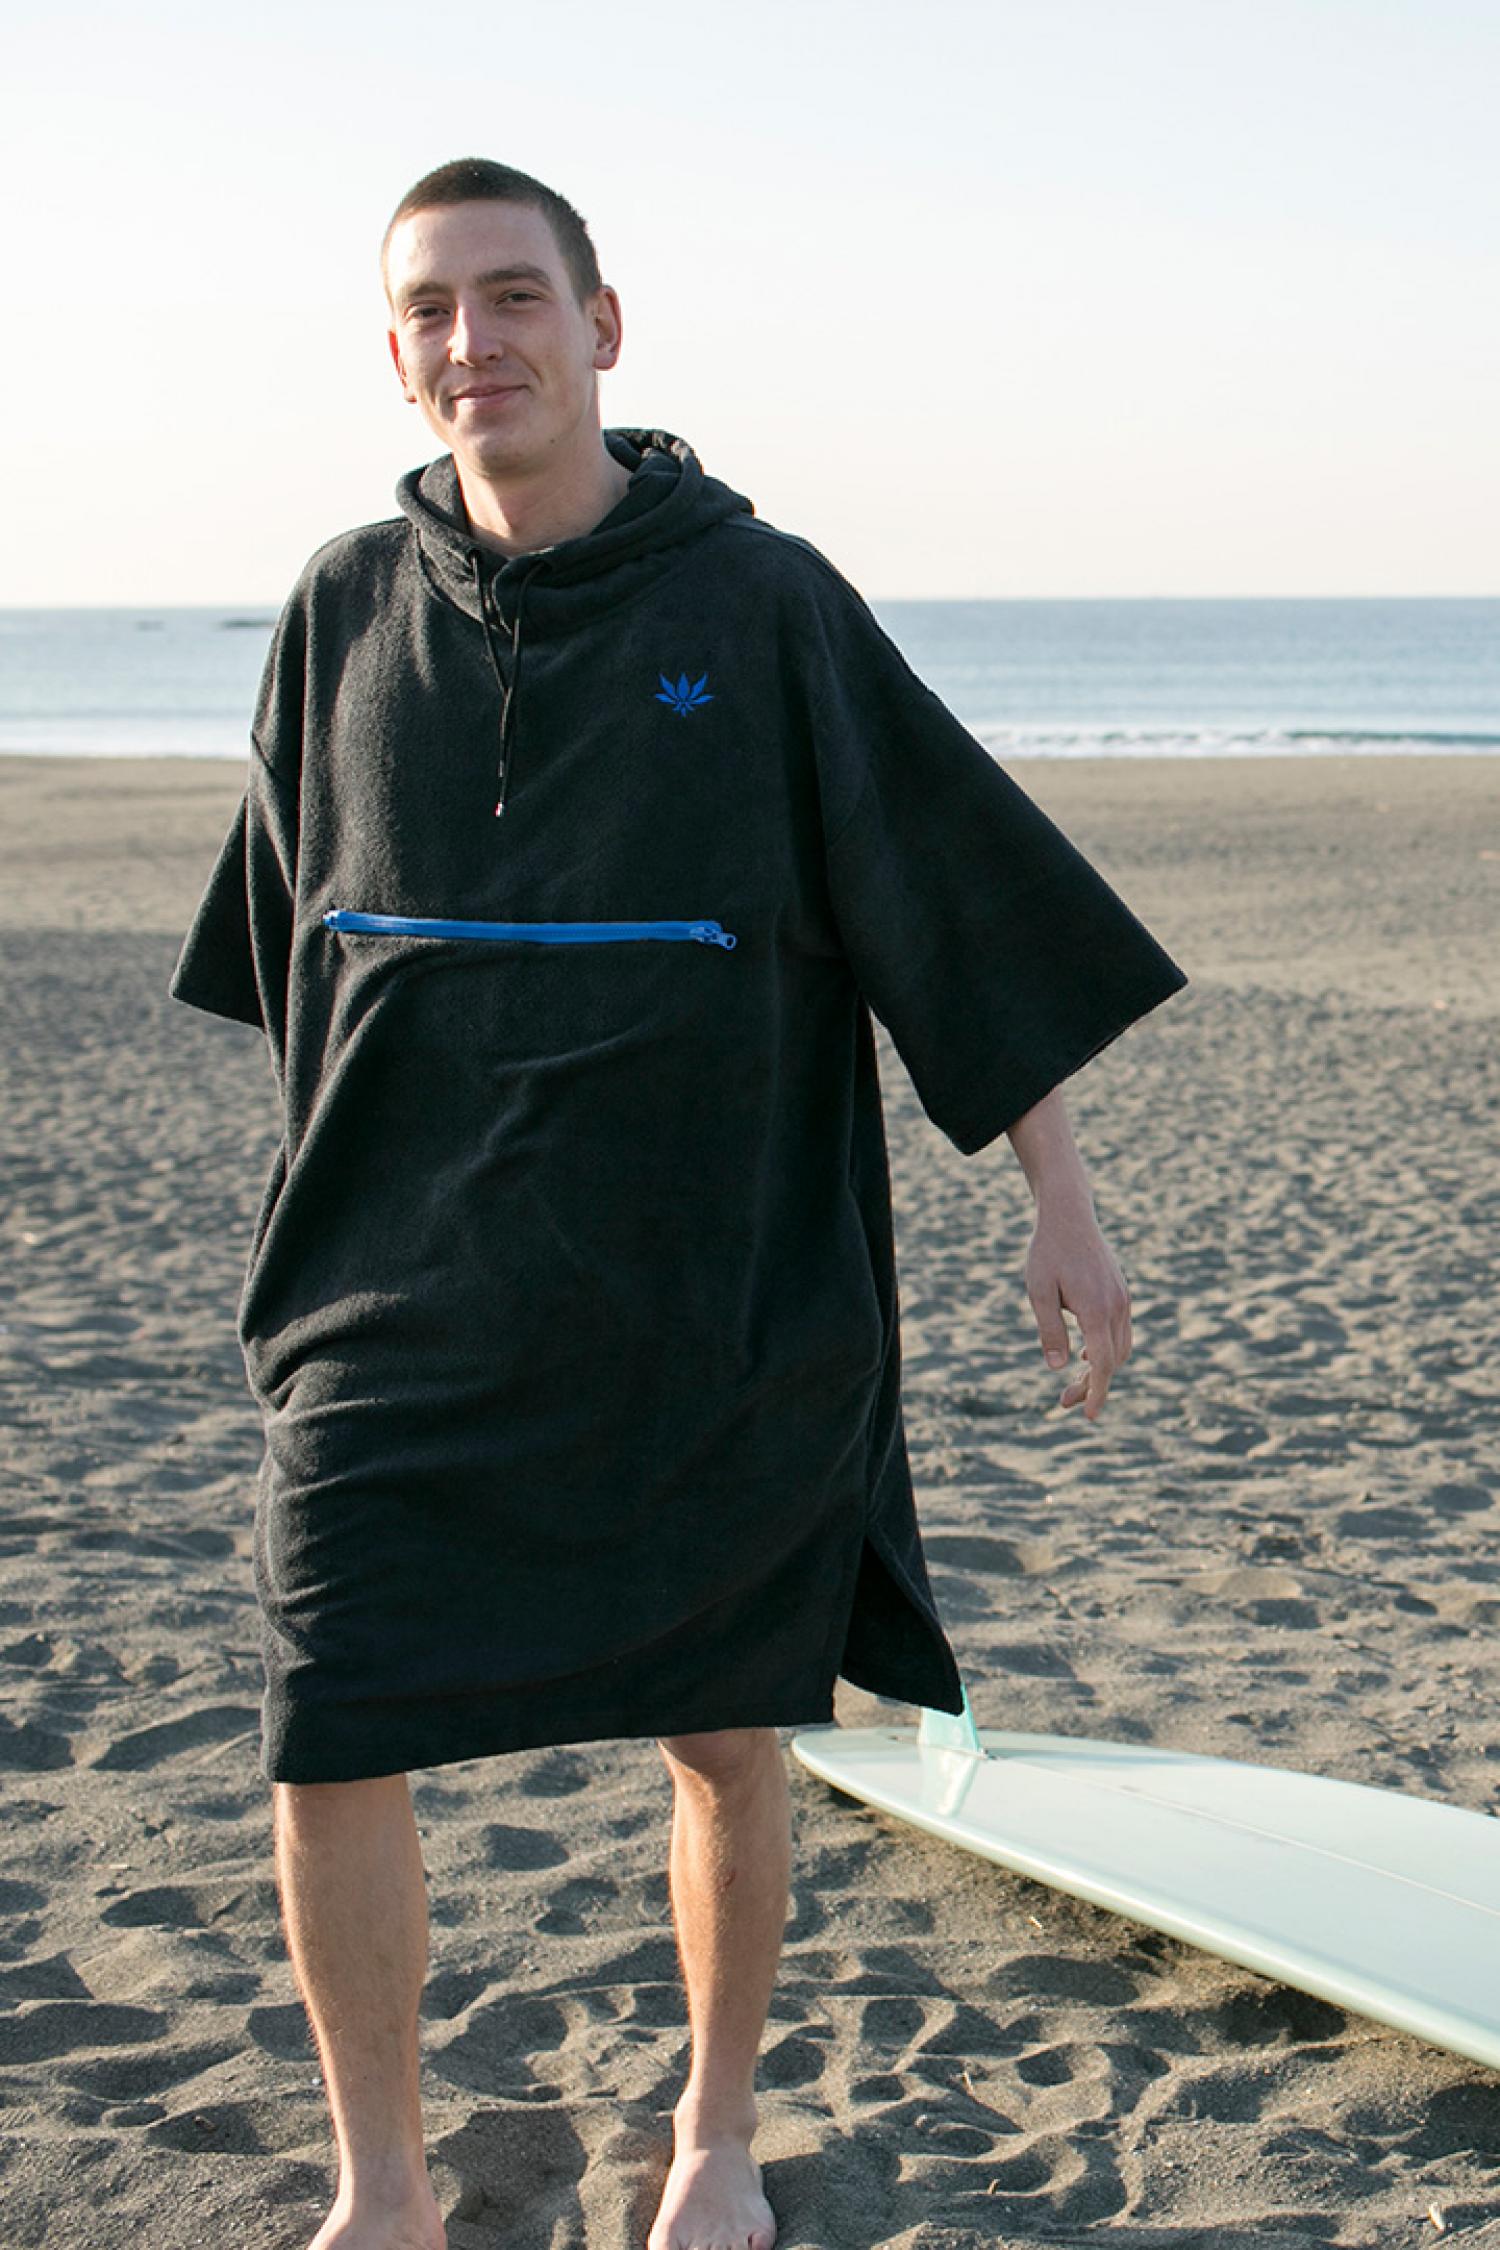 Packable poncho of collaboration item with magazine "Blue".